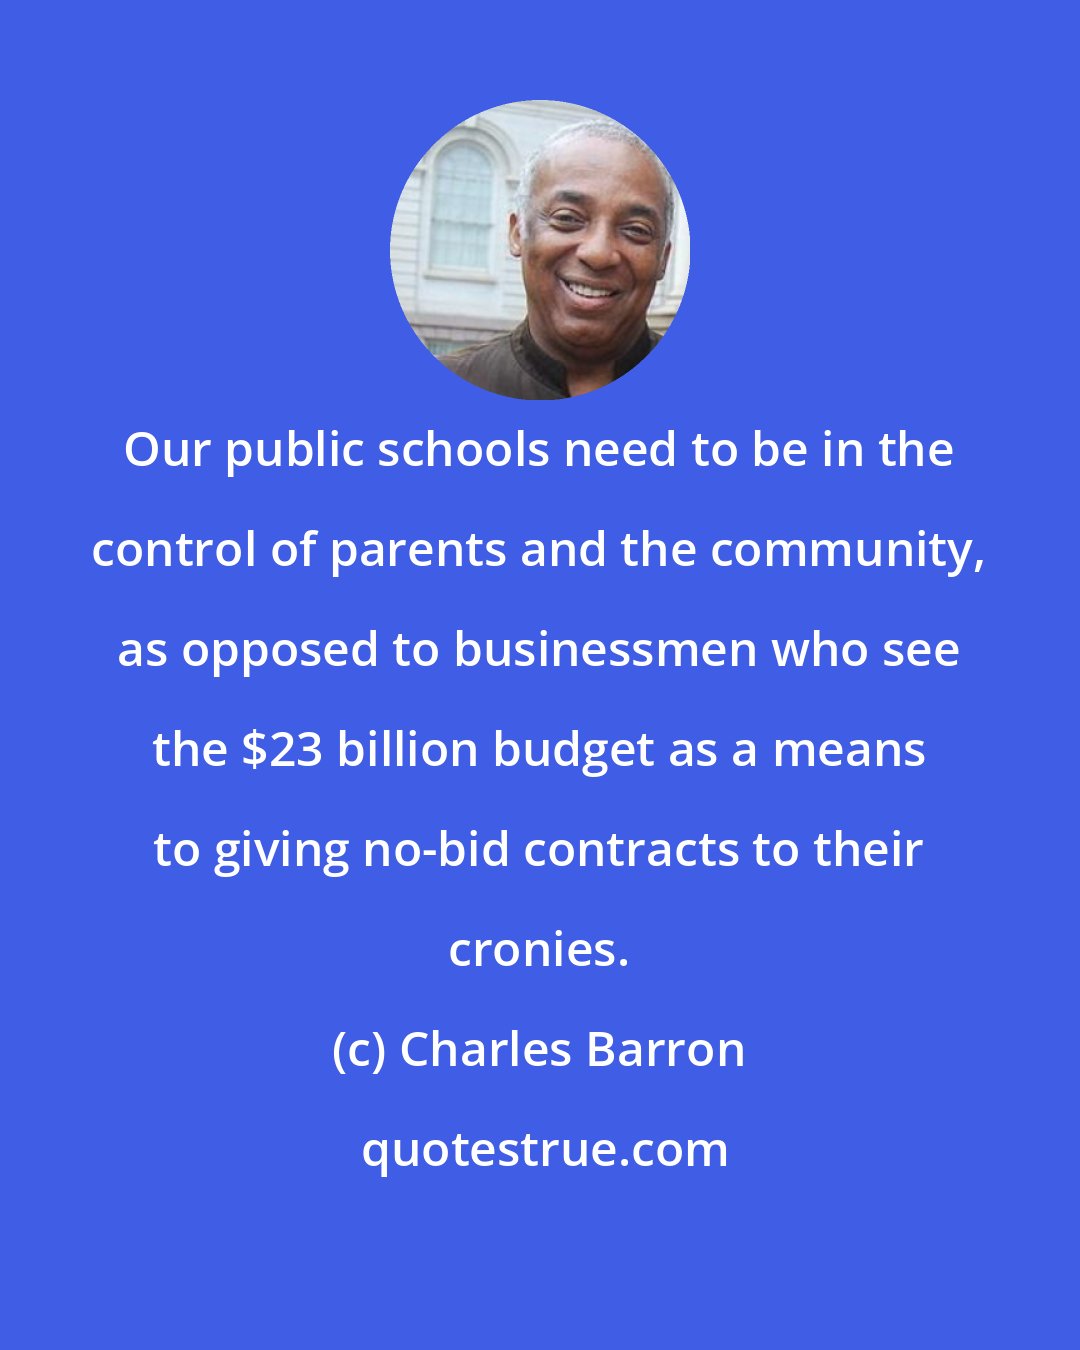 Charles Barron: Our public schools need to be in the control of parents and the community, as opposed to businessmen who see the $23 billion budget as a means to giving no-bid contracts to their cronies.